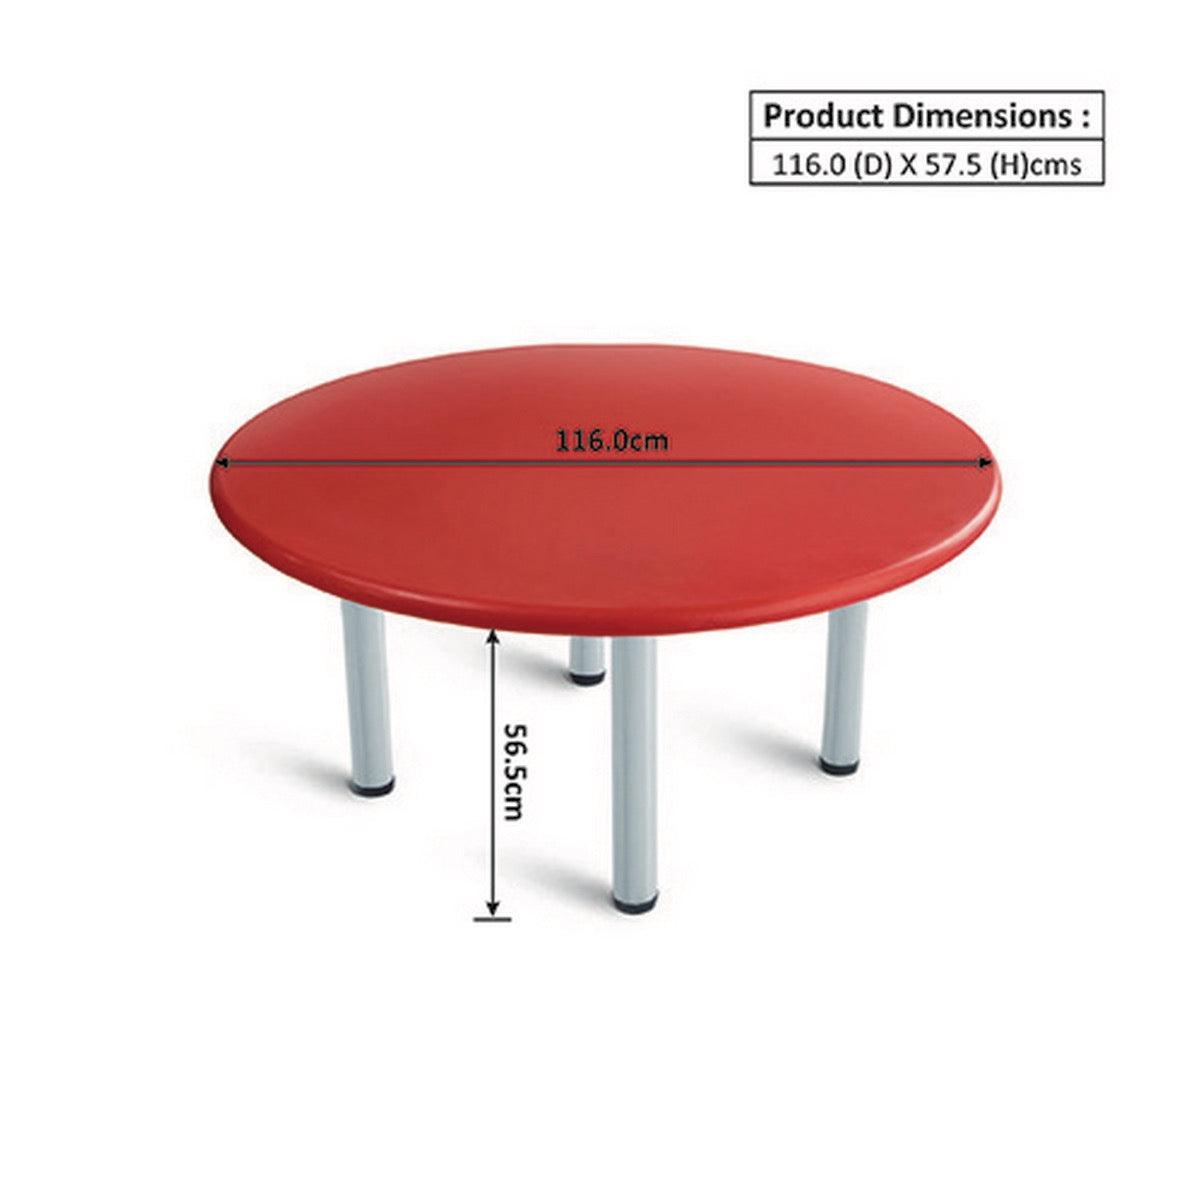 Ok Play Round Table For Kids, Round And Smooth Edges For The Safety, Perfect For Home And School, Red, 2 to 4 Years